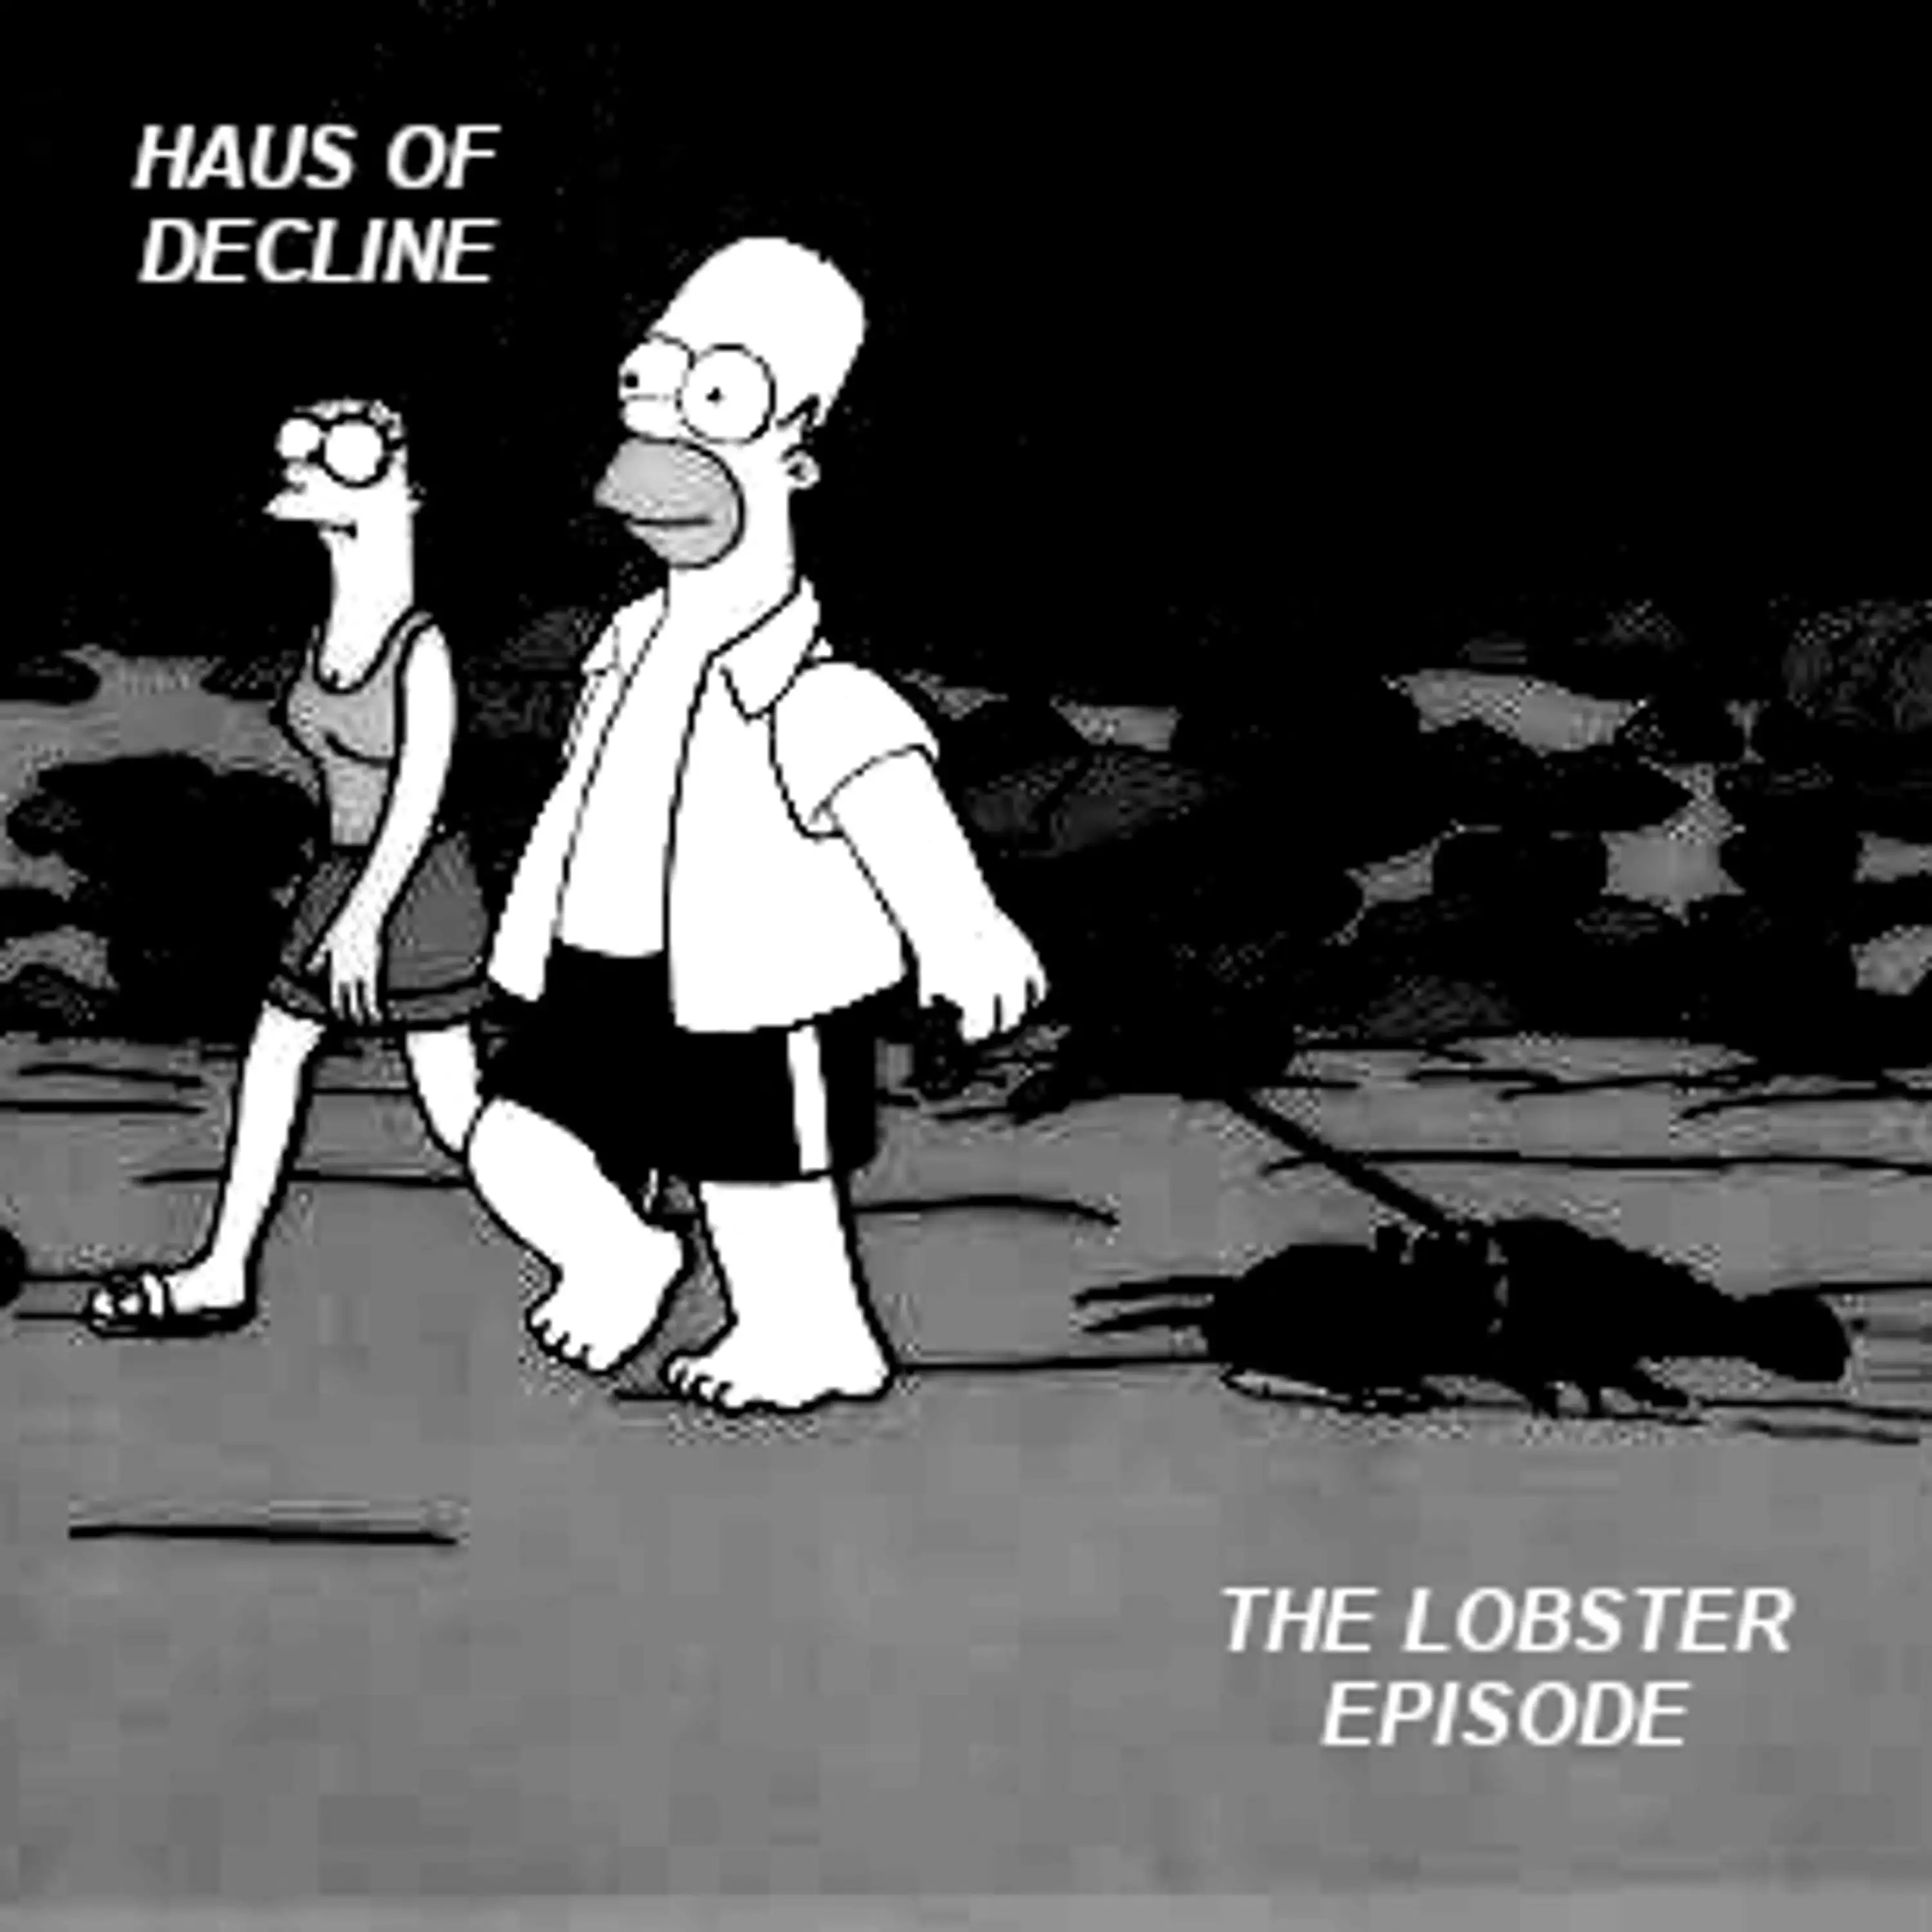 The Lobster Episode feat. Jay